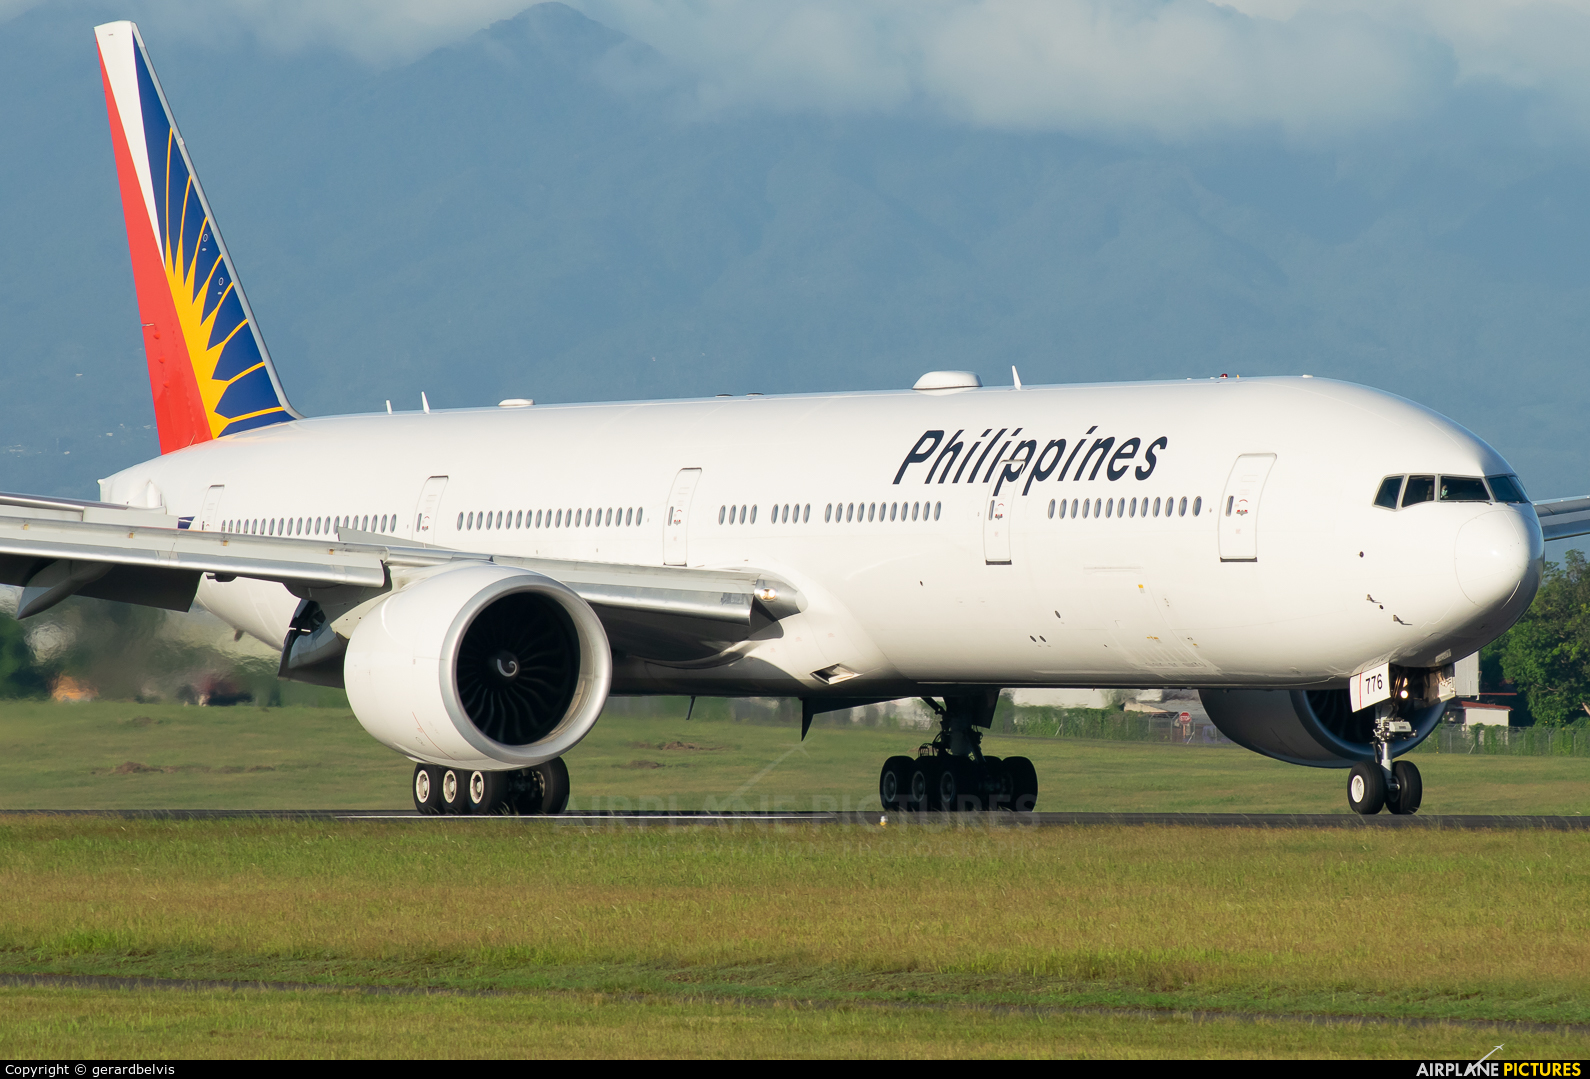 Philippines Airlines RP-C7776 aircraft at Off Airport - Philippines